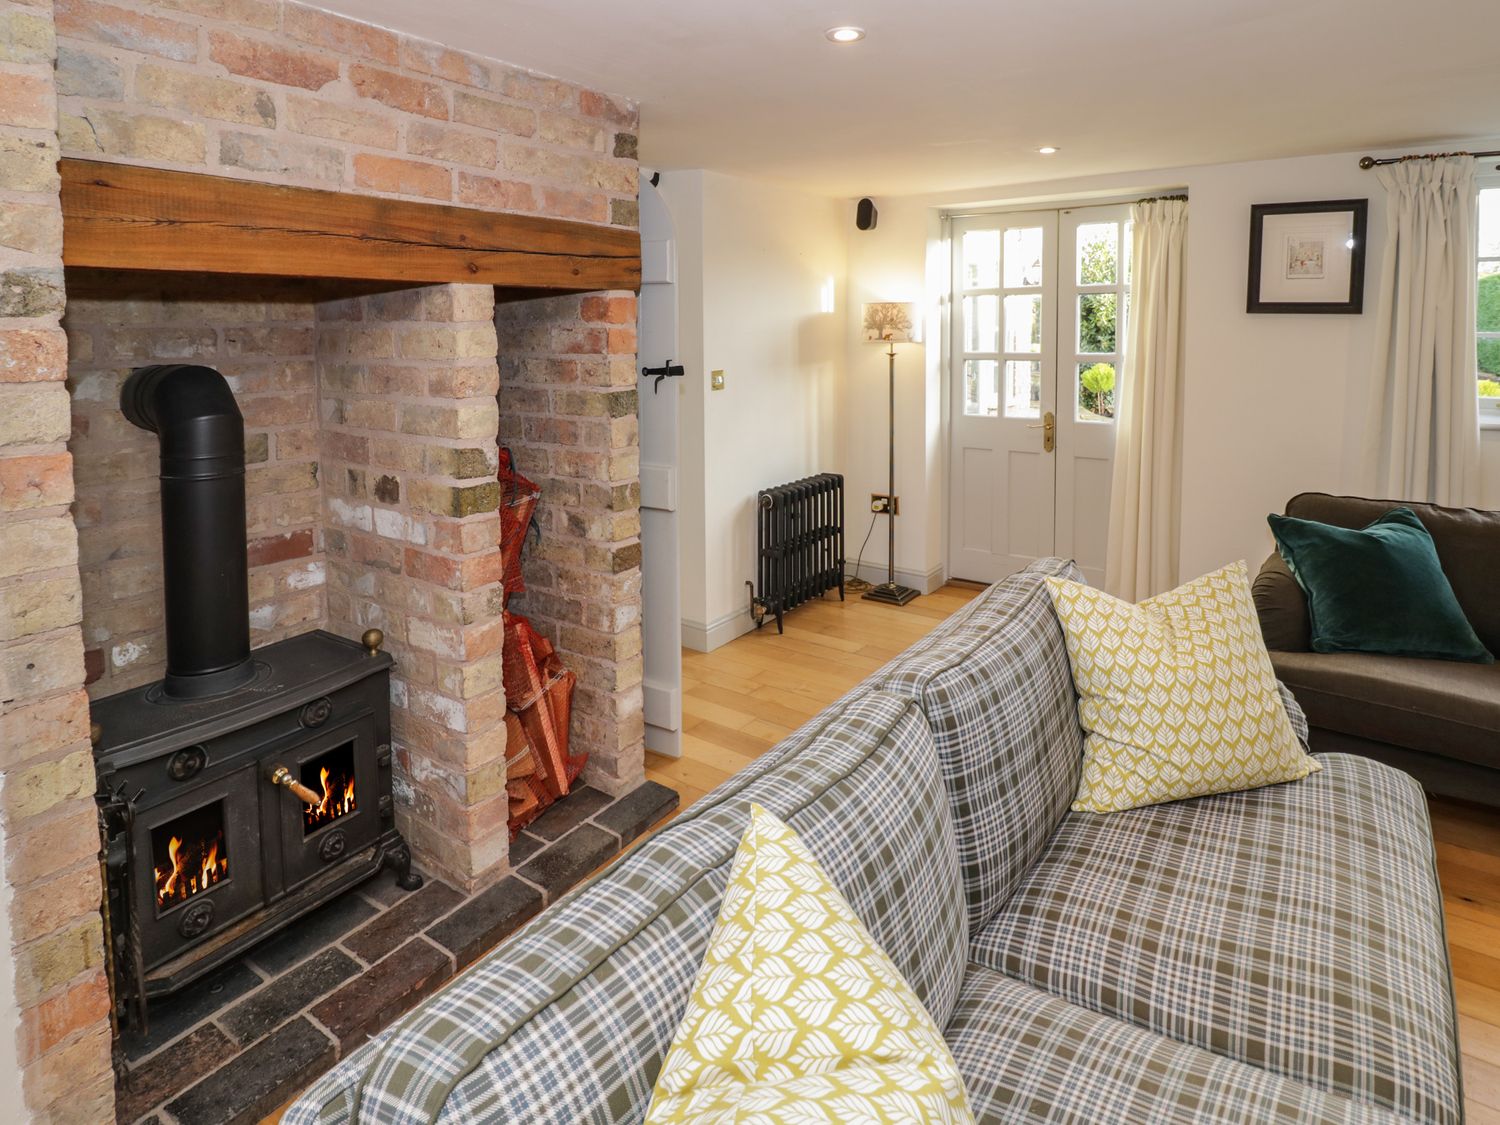 Home Farm Cottage in Stockton, Warwickshire. Six-bedroom home with hot tub and games room. Near shop